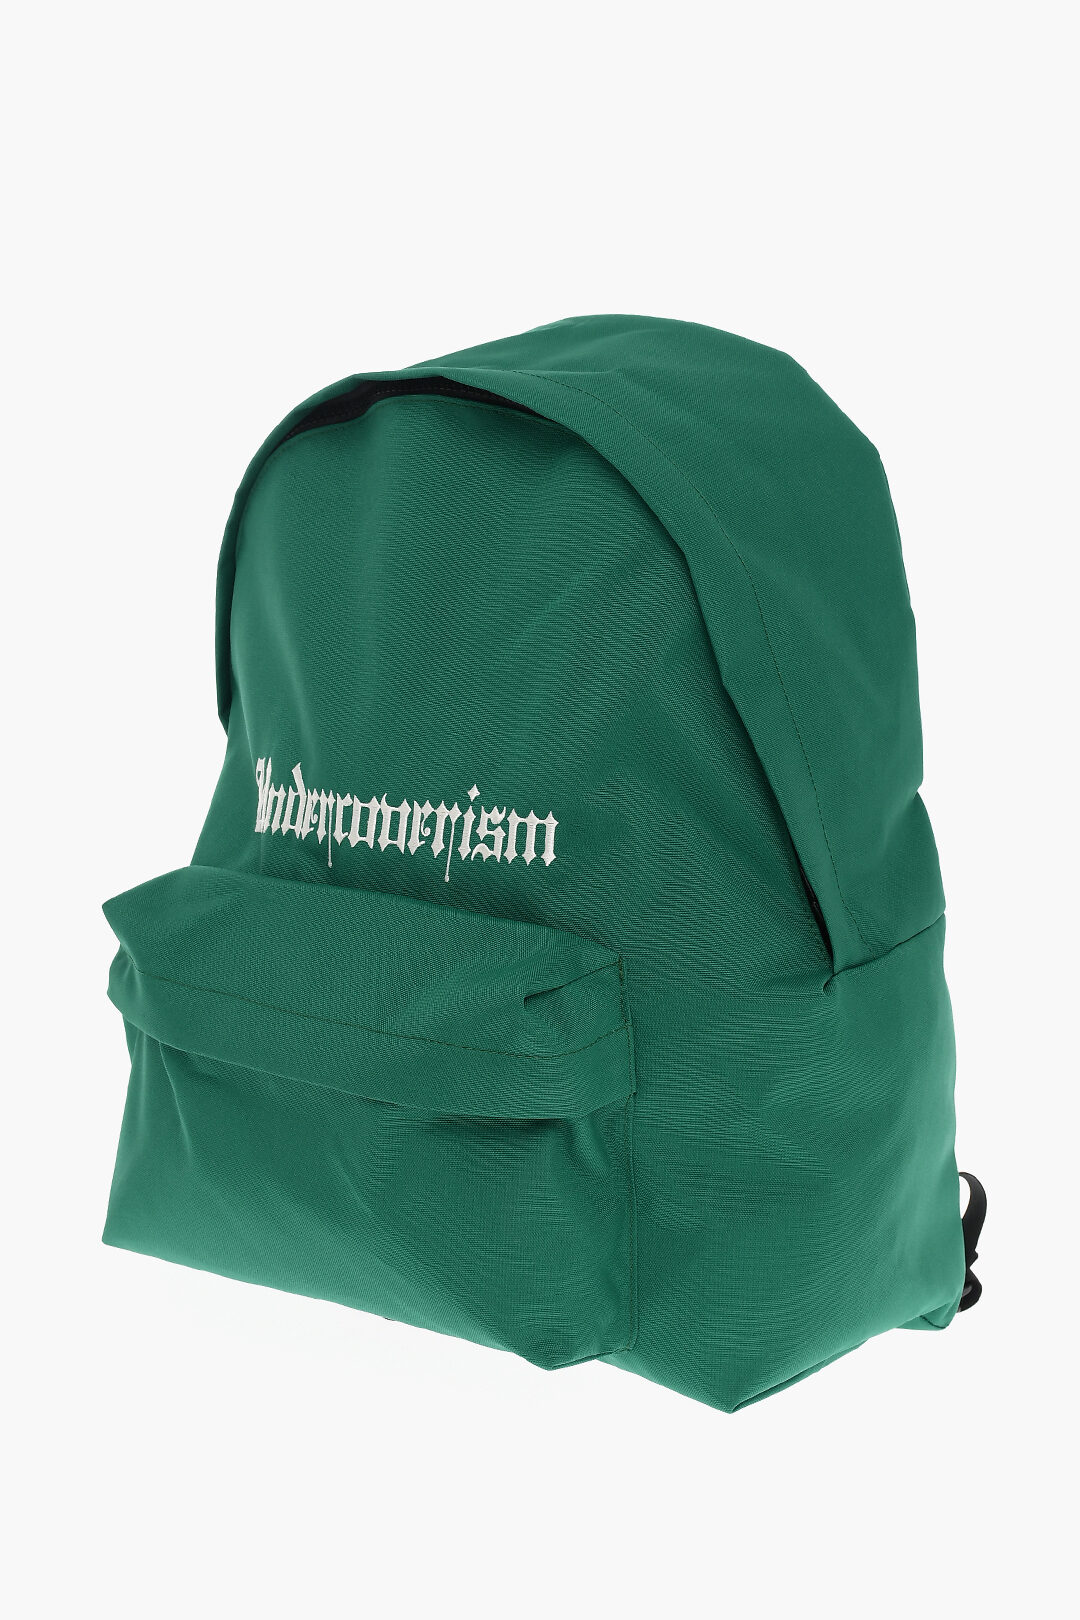 Undercover UNDERCOVERISM Solid-colored Backpack with Embroidered